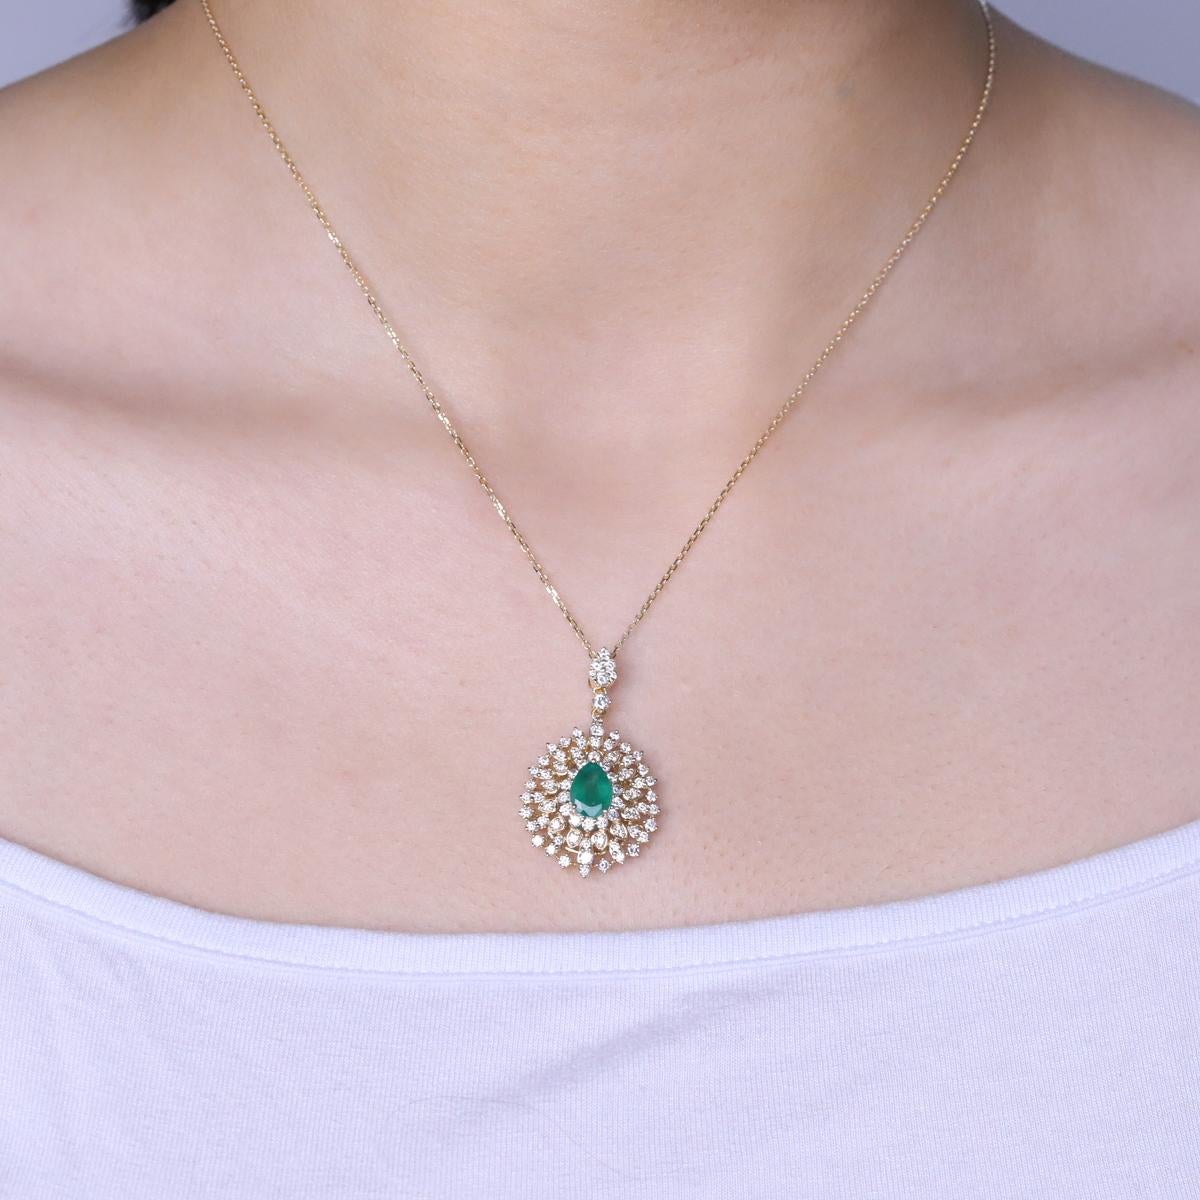 Decorate yourself in elegance with this Necklaces is crafted from 14-karat Yellow Gold by Gin & Grace. This Necklaces is made up of 6*8 Pear-cut Emerald (1 Pcs) 1.29 carat and Round-cut White Diamond (75 Pcs) 1.20 carat. This Necklaces is weight